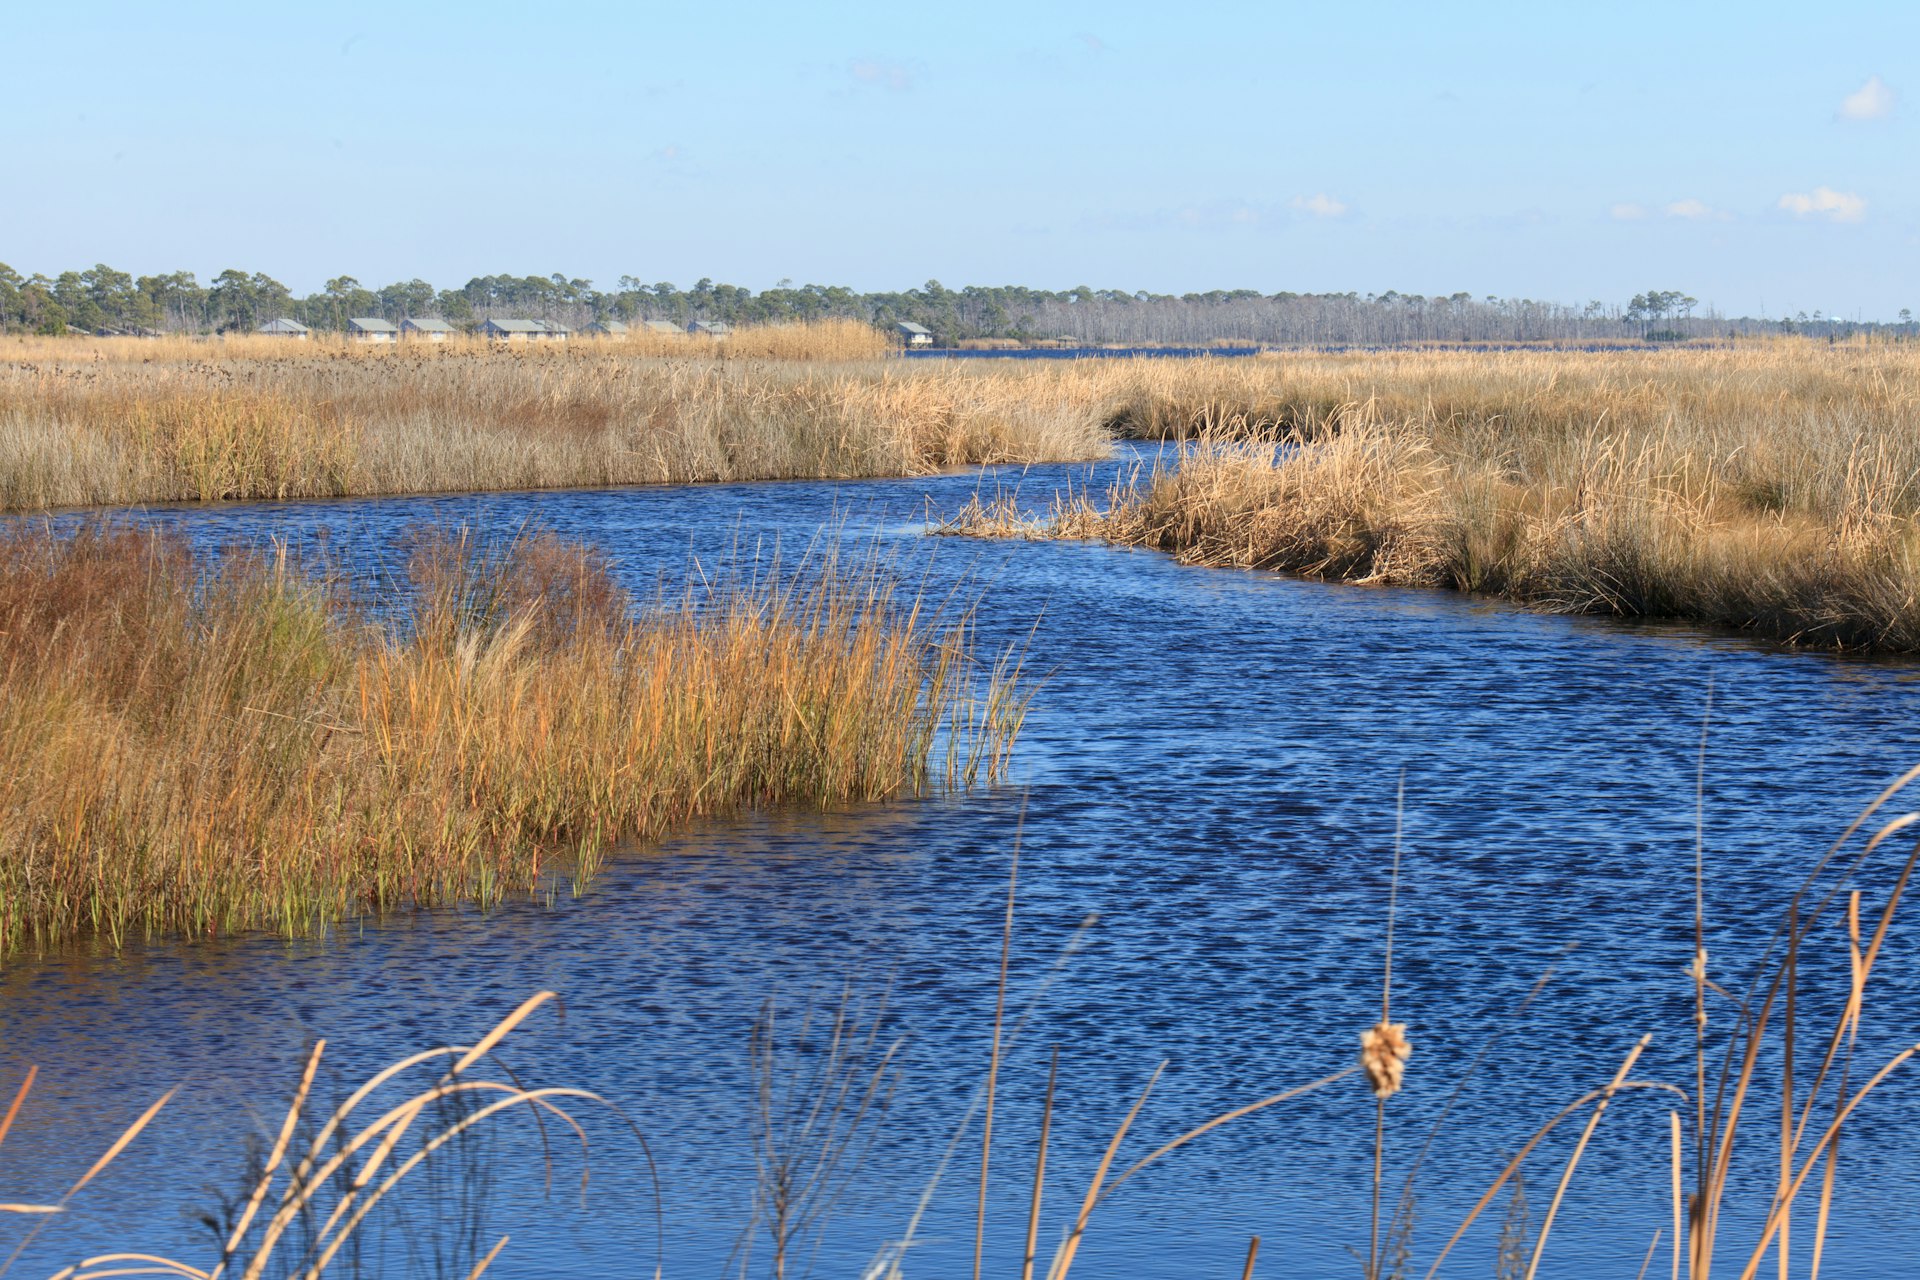 Straw-colored reeds and grasses emerge from a freshwater lake.